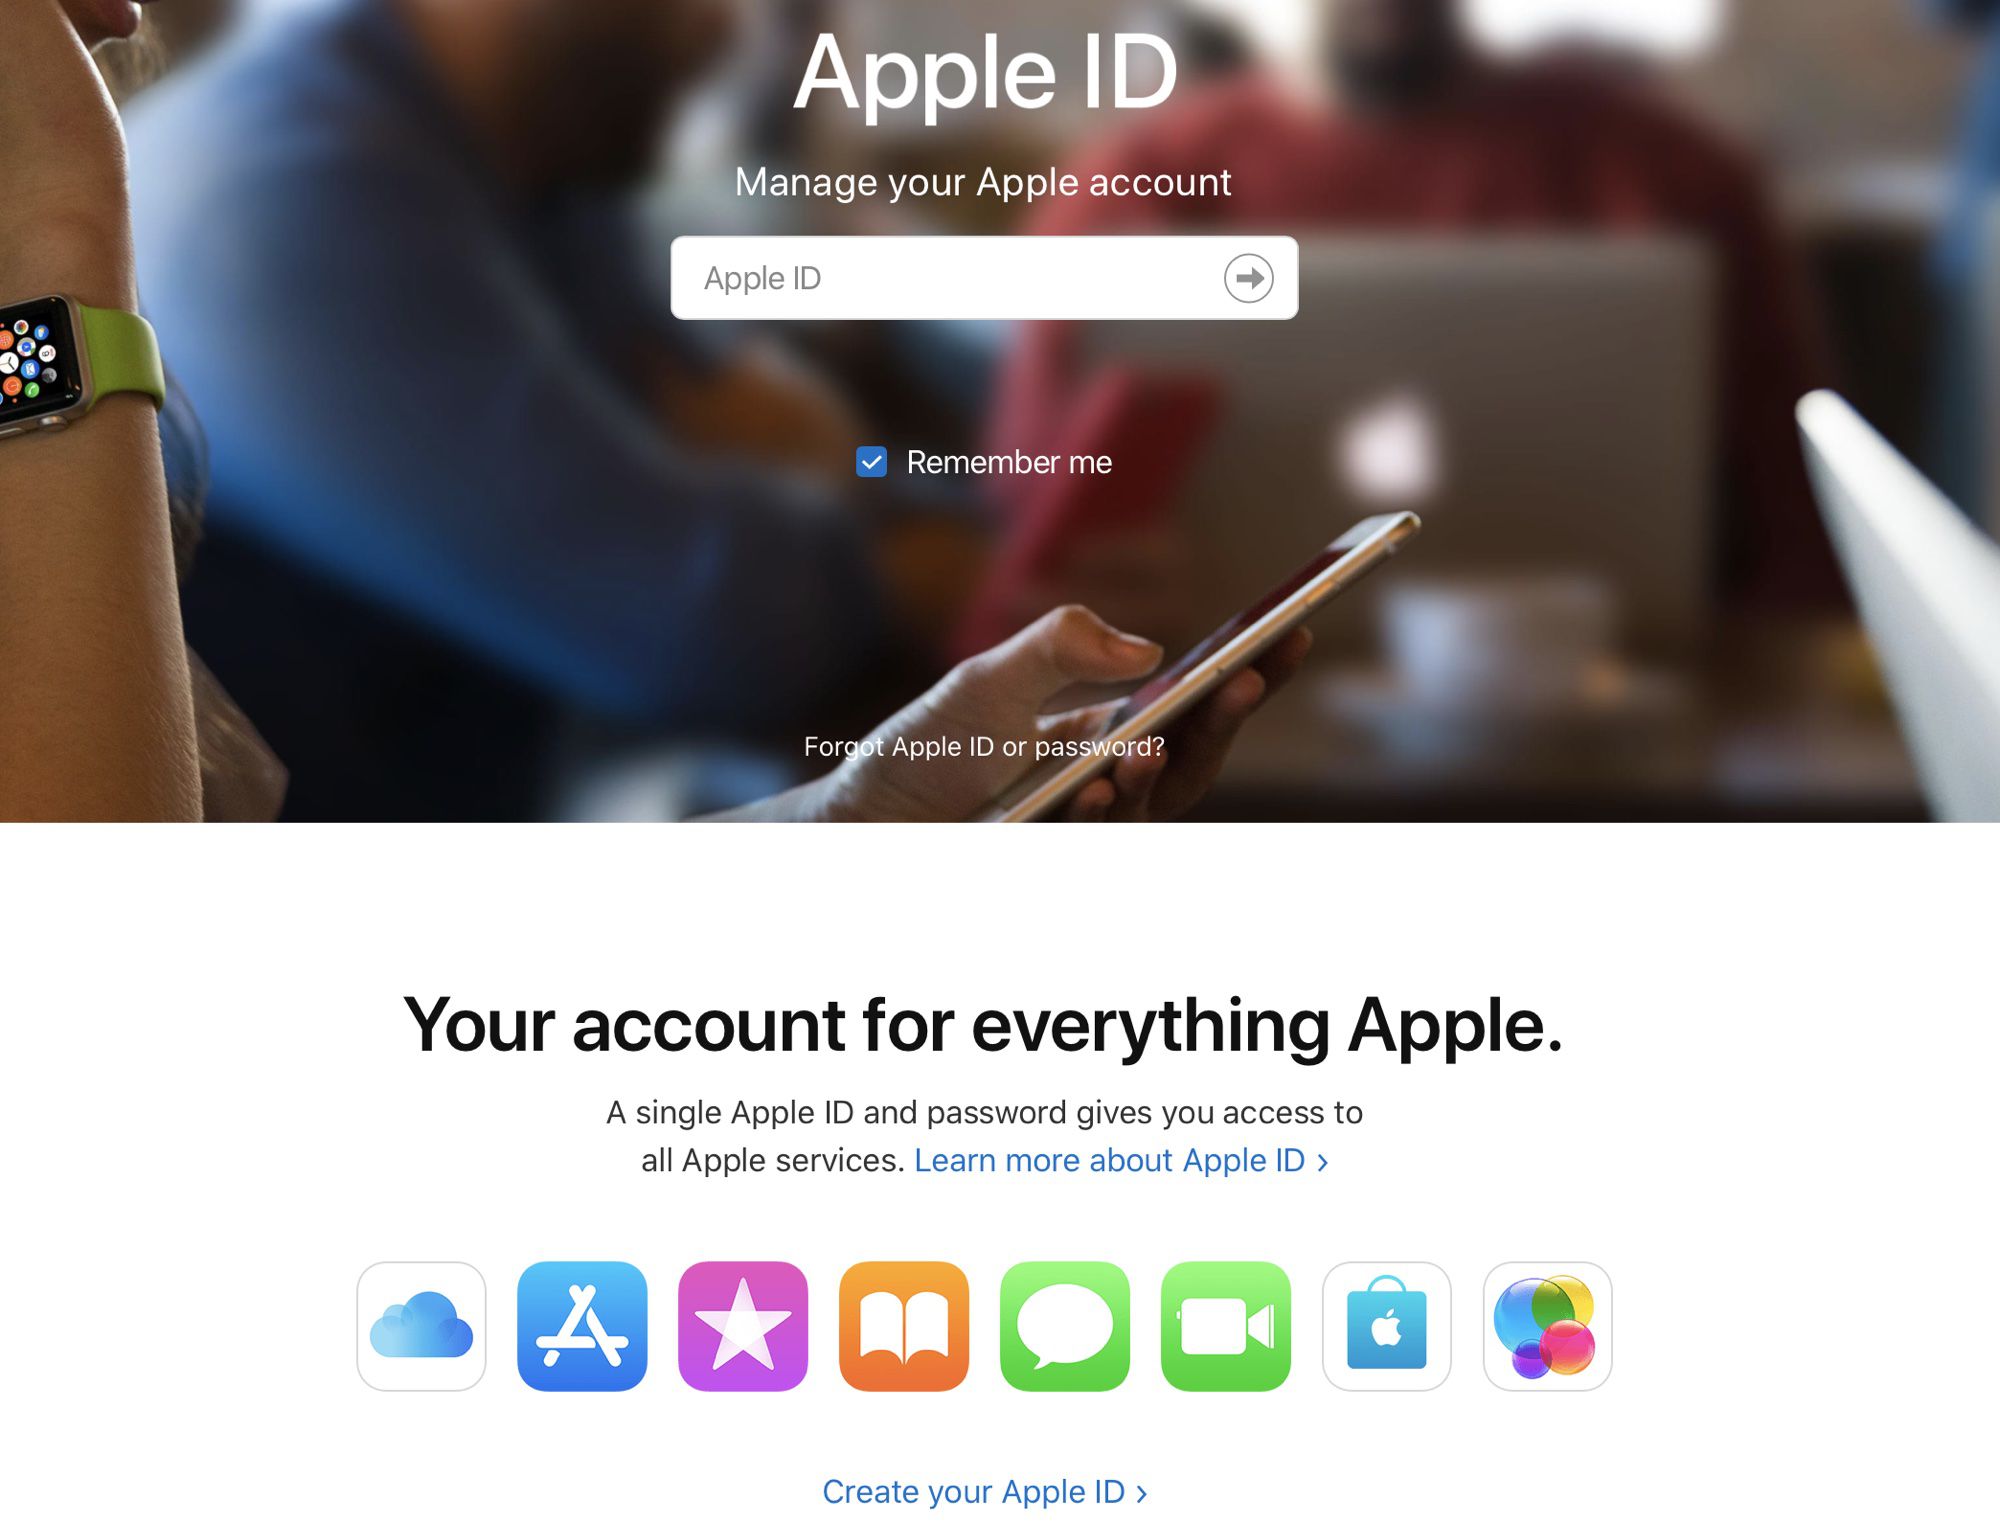 With iOS 15, Apple is introducing a new Digital Legacy program that designates people as Legacy Contacts to let them access your Apple ID account and 